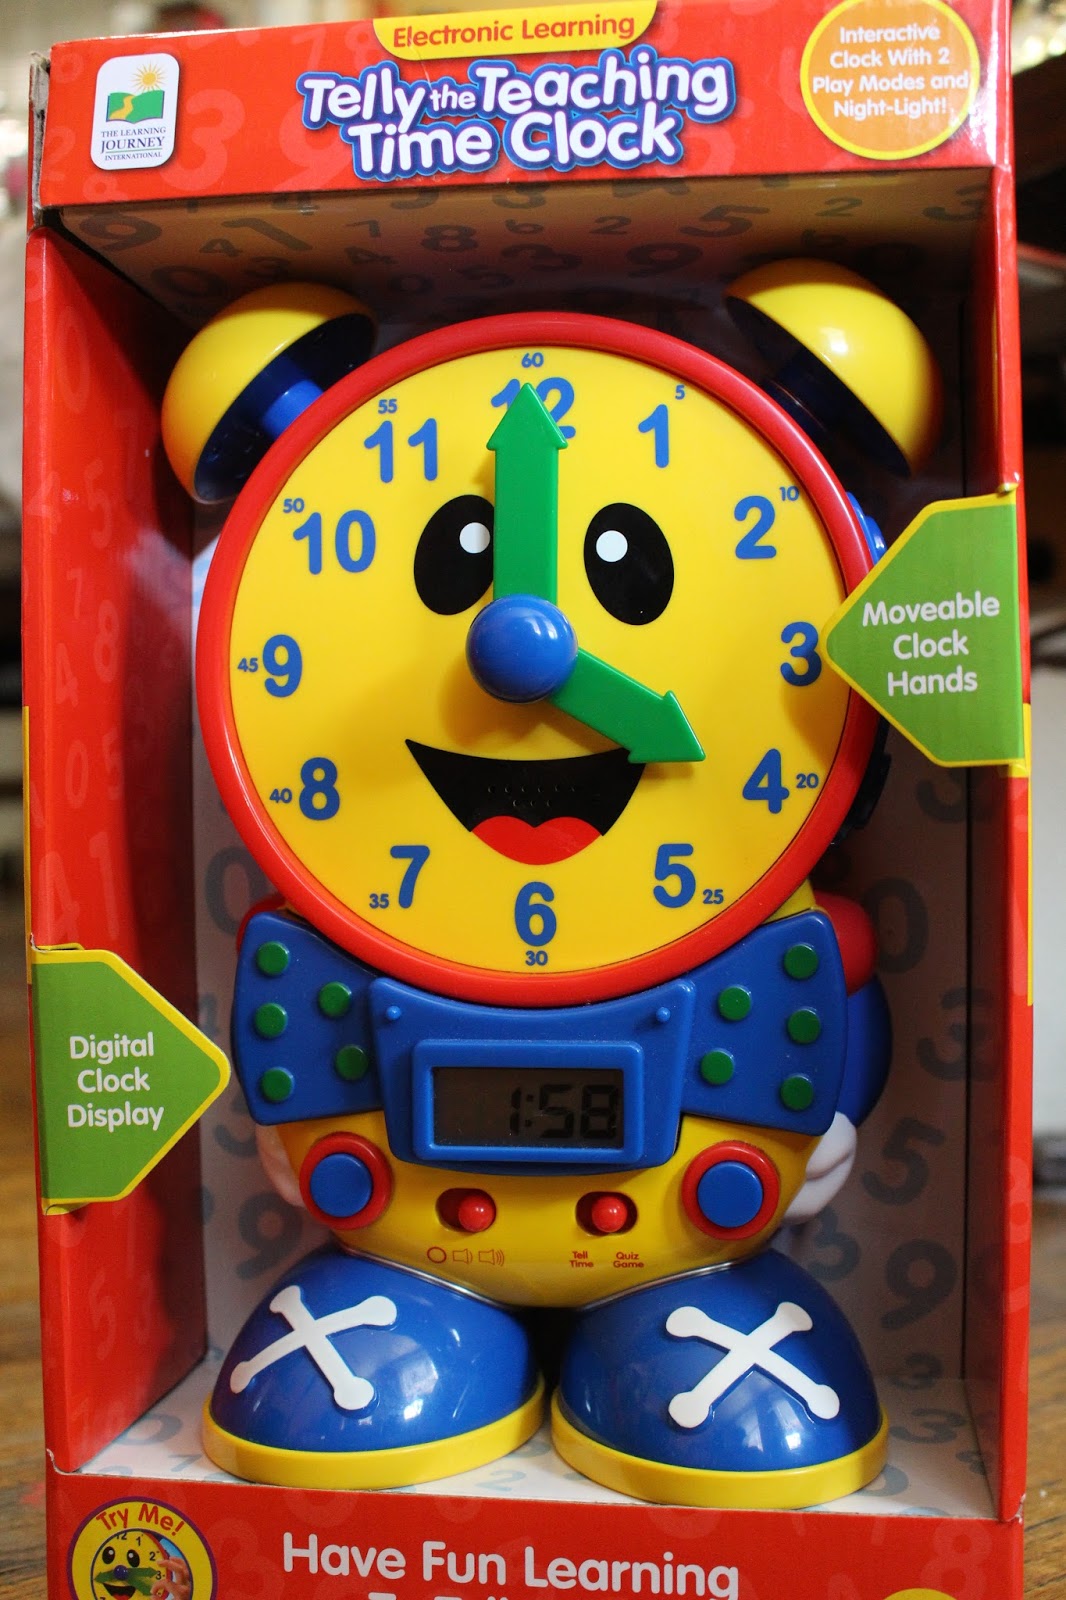 On a Learning Journey with Telly the Teaching Time Clock! - New